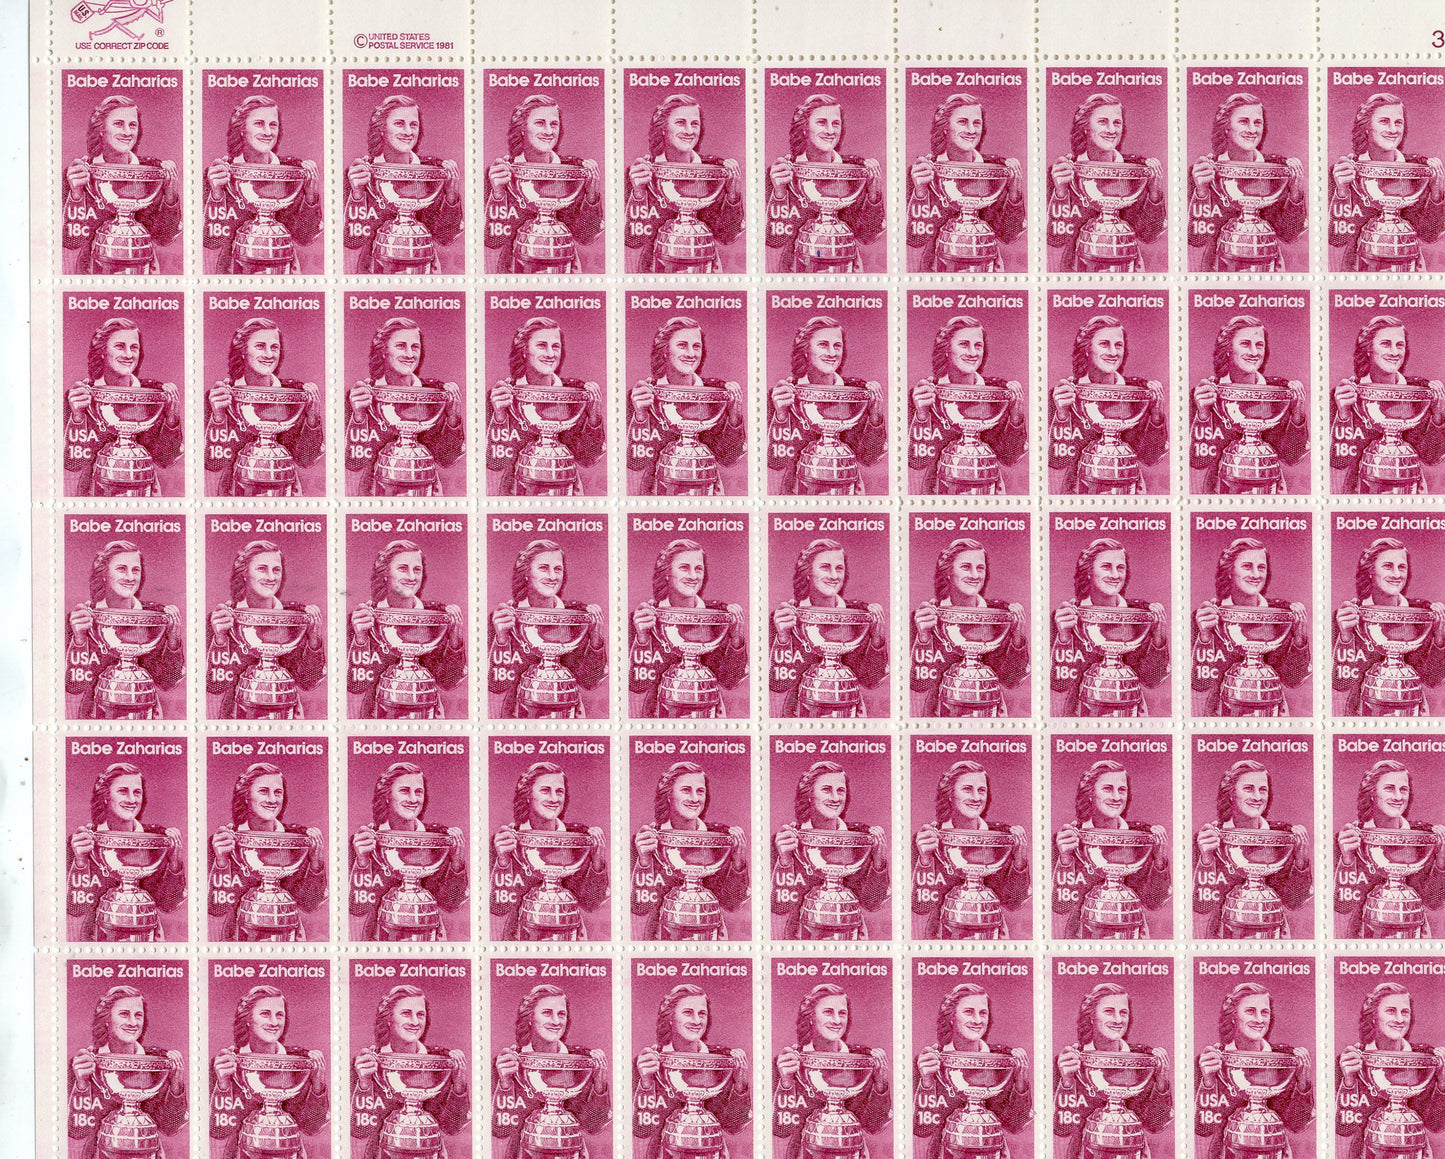 BABE ZAHARIAS GREATEST Women Athlete of her time Sheet of 50 18c Stamps - Greatest Amateur Ever - Issued in 1981 -